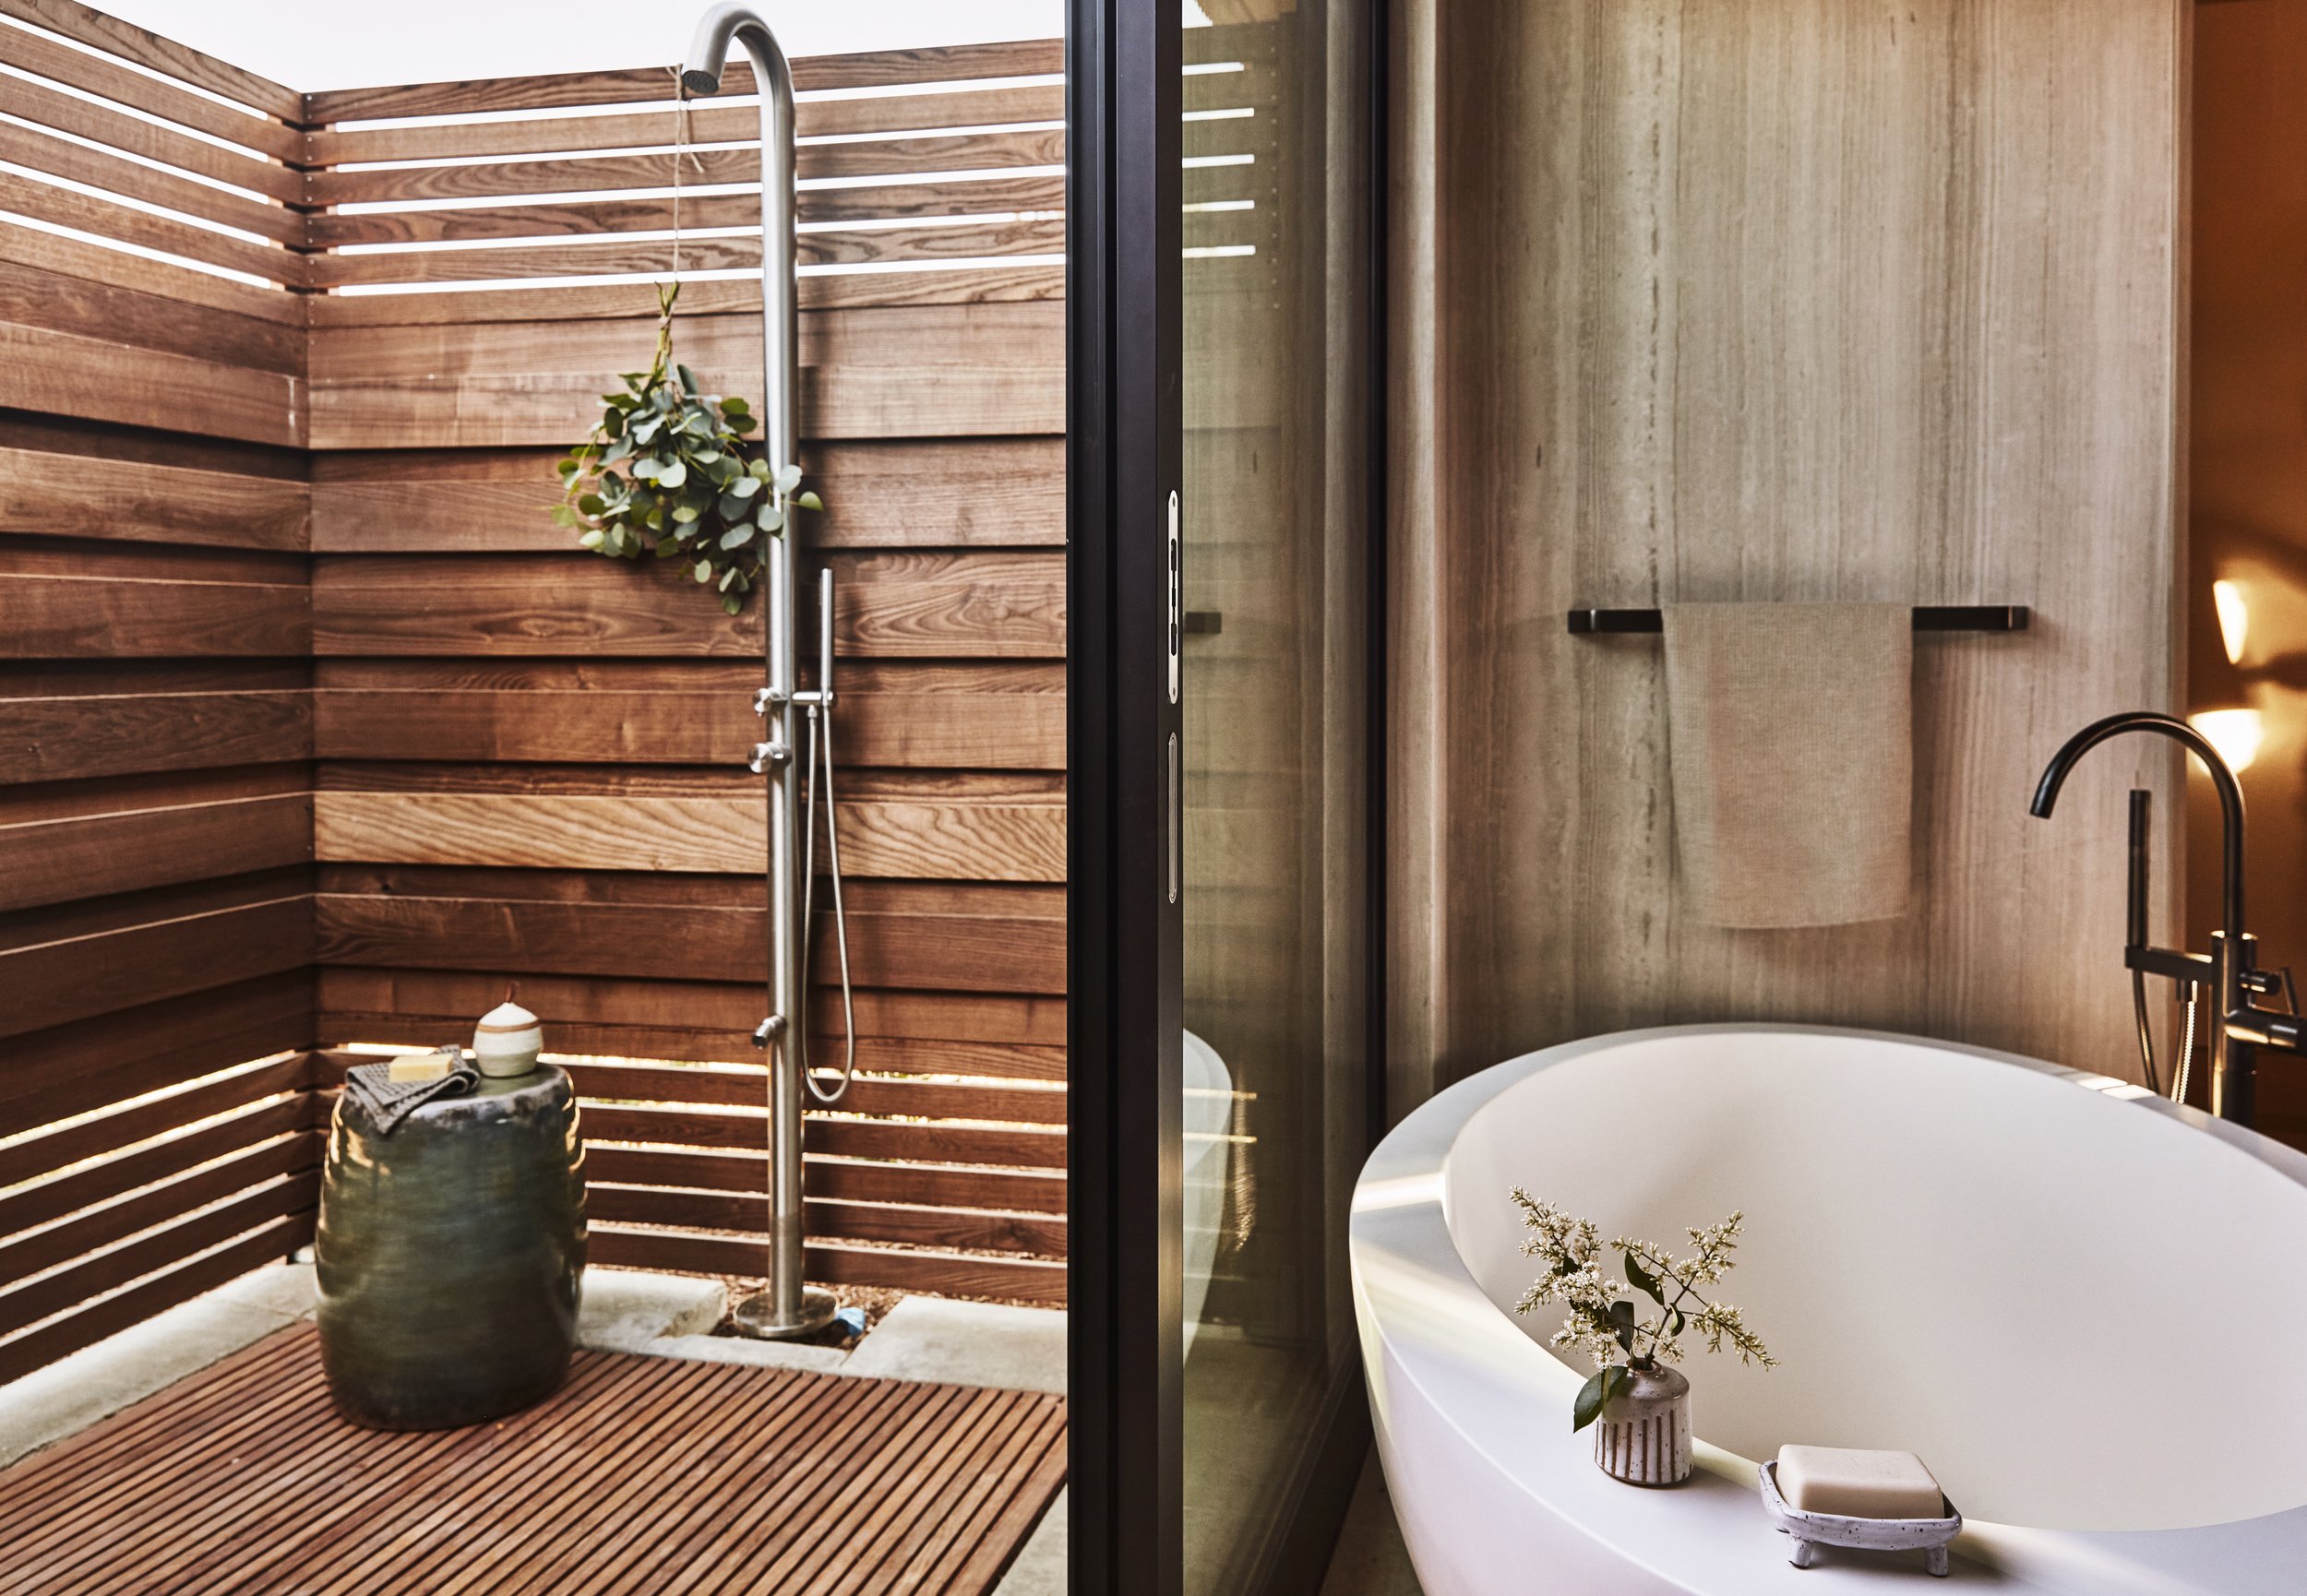 Luxe bathtub and outdoor shower at Stanly Ranch in Napa Valley